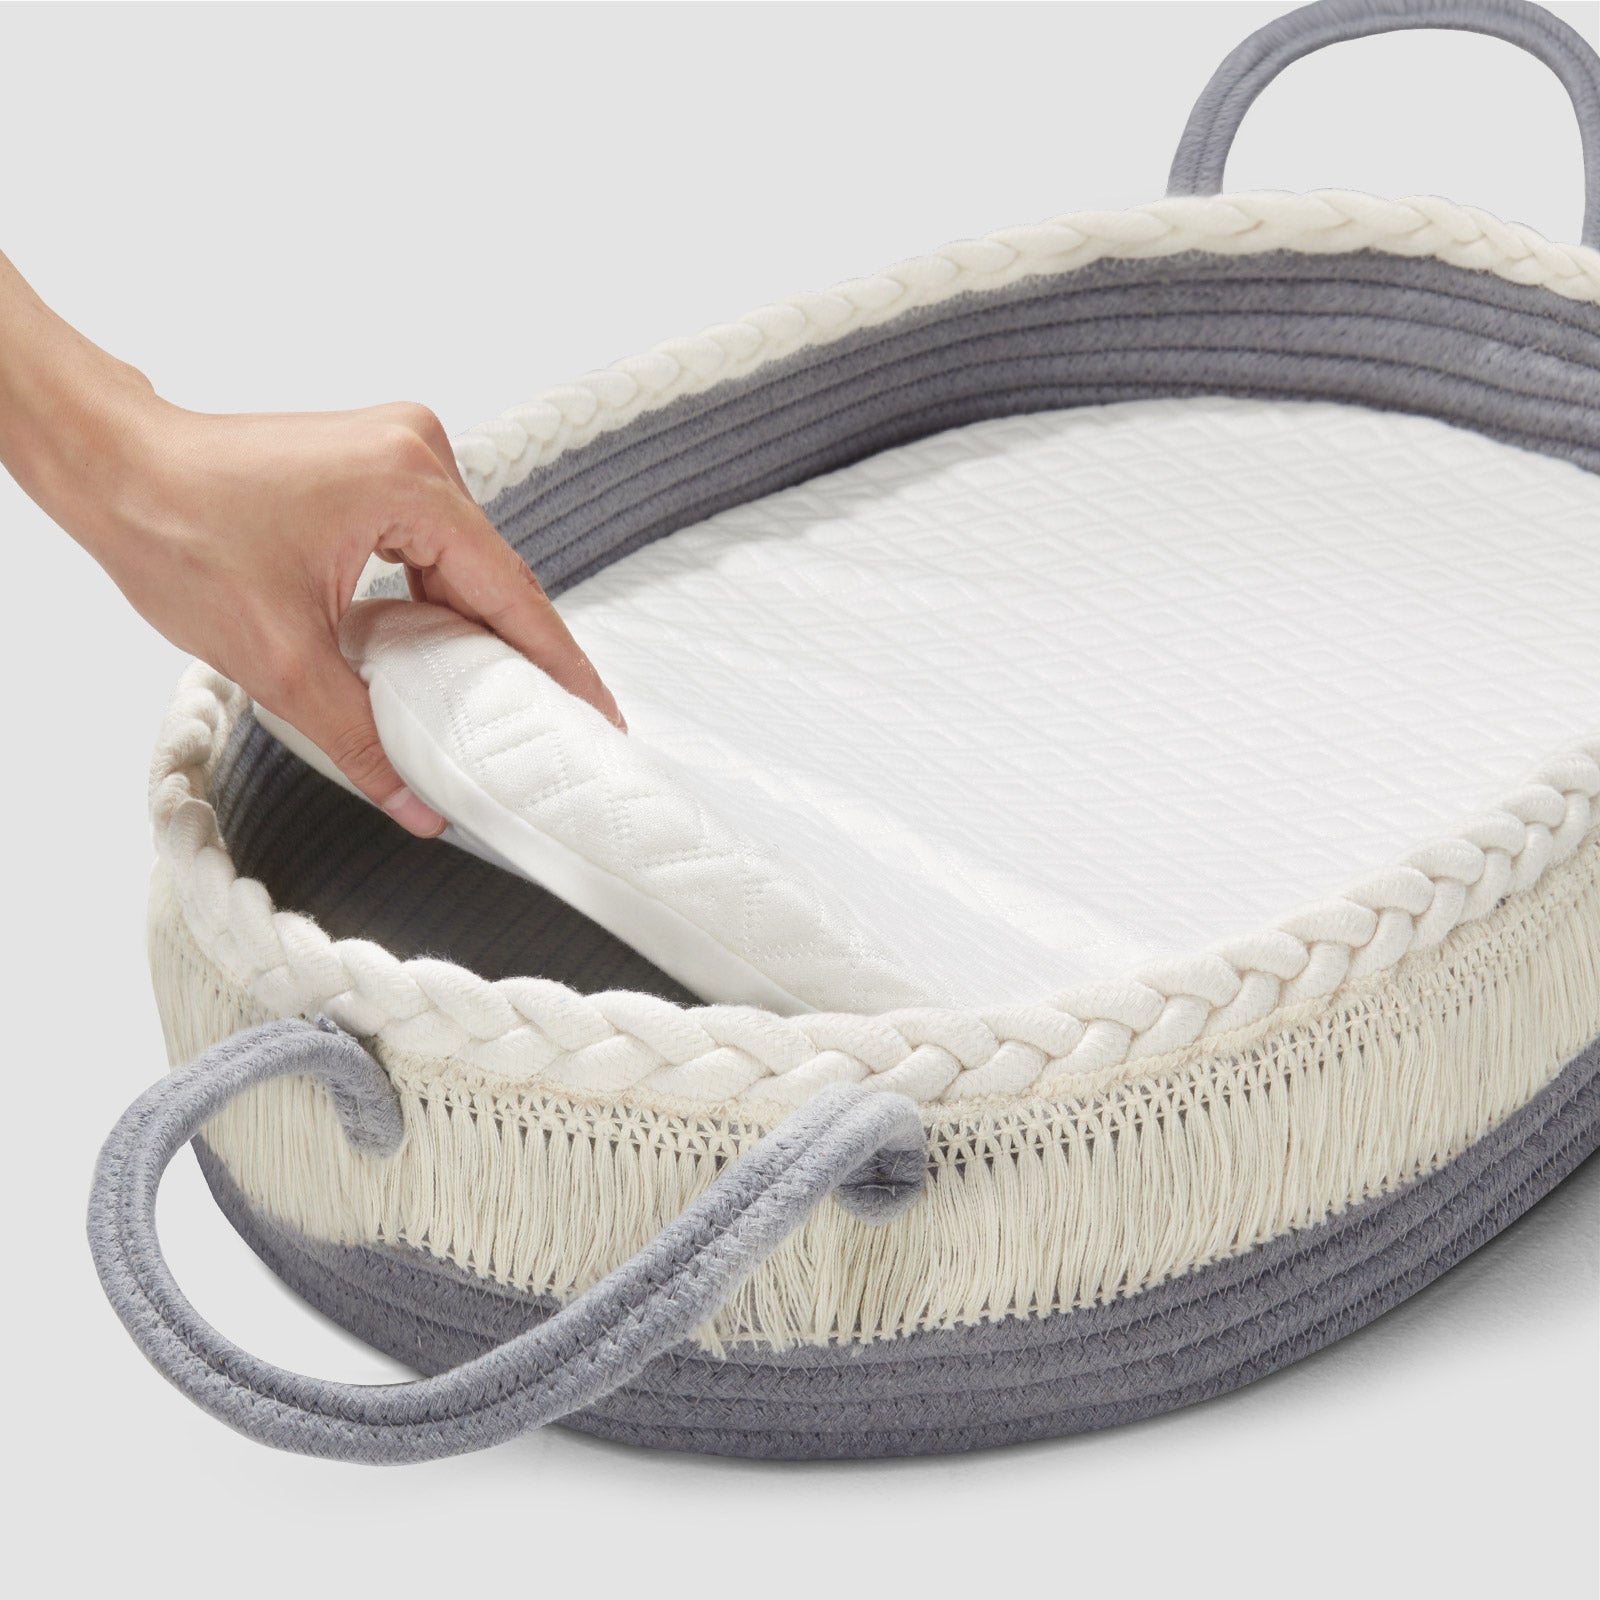  HARPPA Baby Changing Basket, Moses Basket with Waterproof Pad  and Blanket, Portable and Washable Woven Basket for Dresser and Diaper  Changing Baby Nursery(white) : Baby